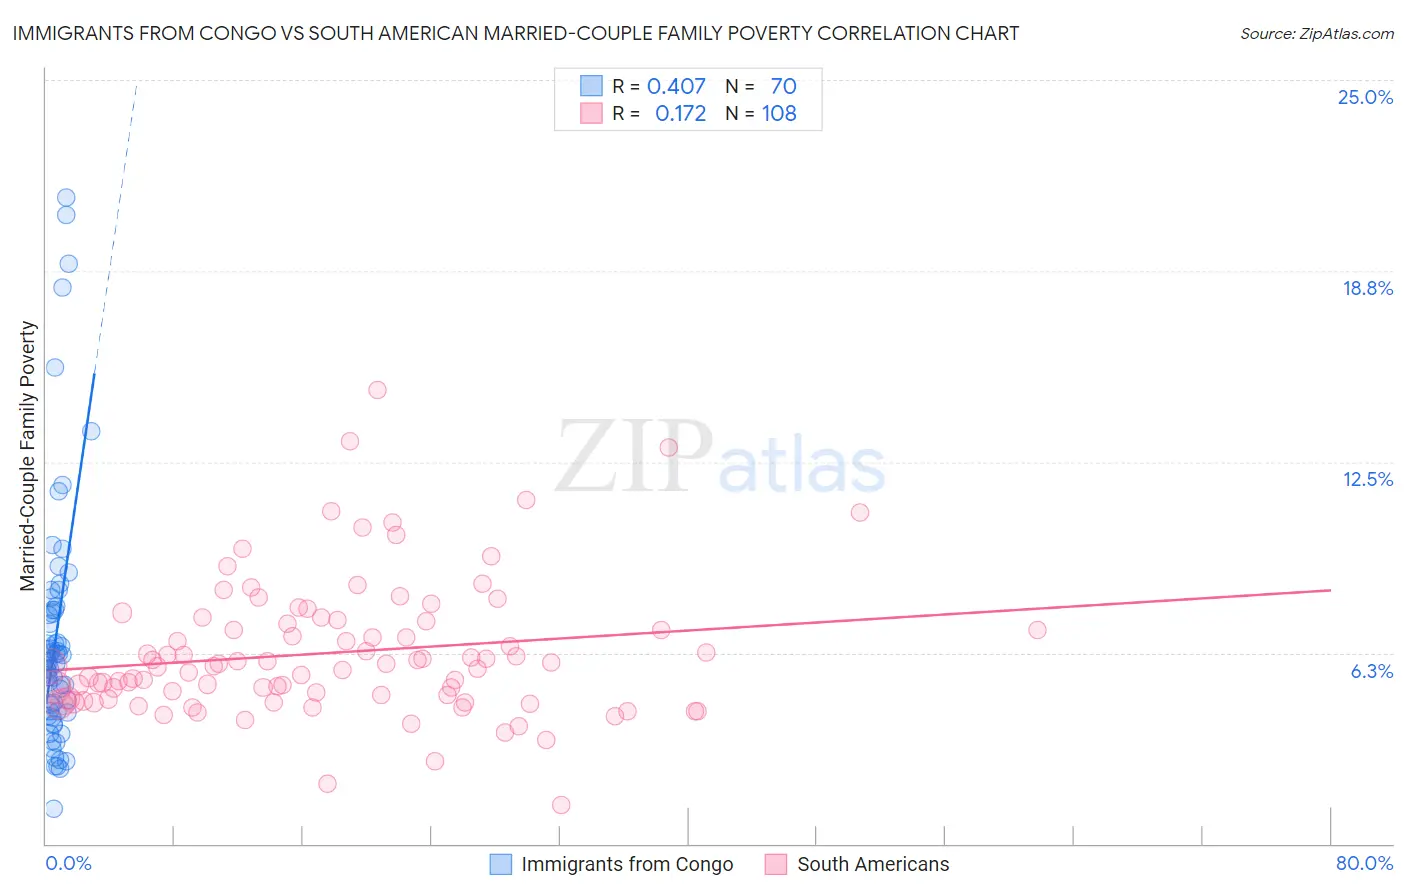 Immigrants from Congo vs South American Married-Couple Family Poverty